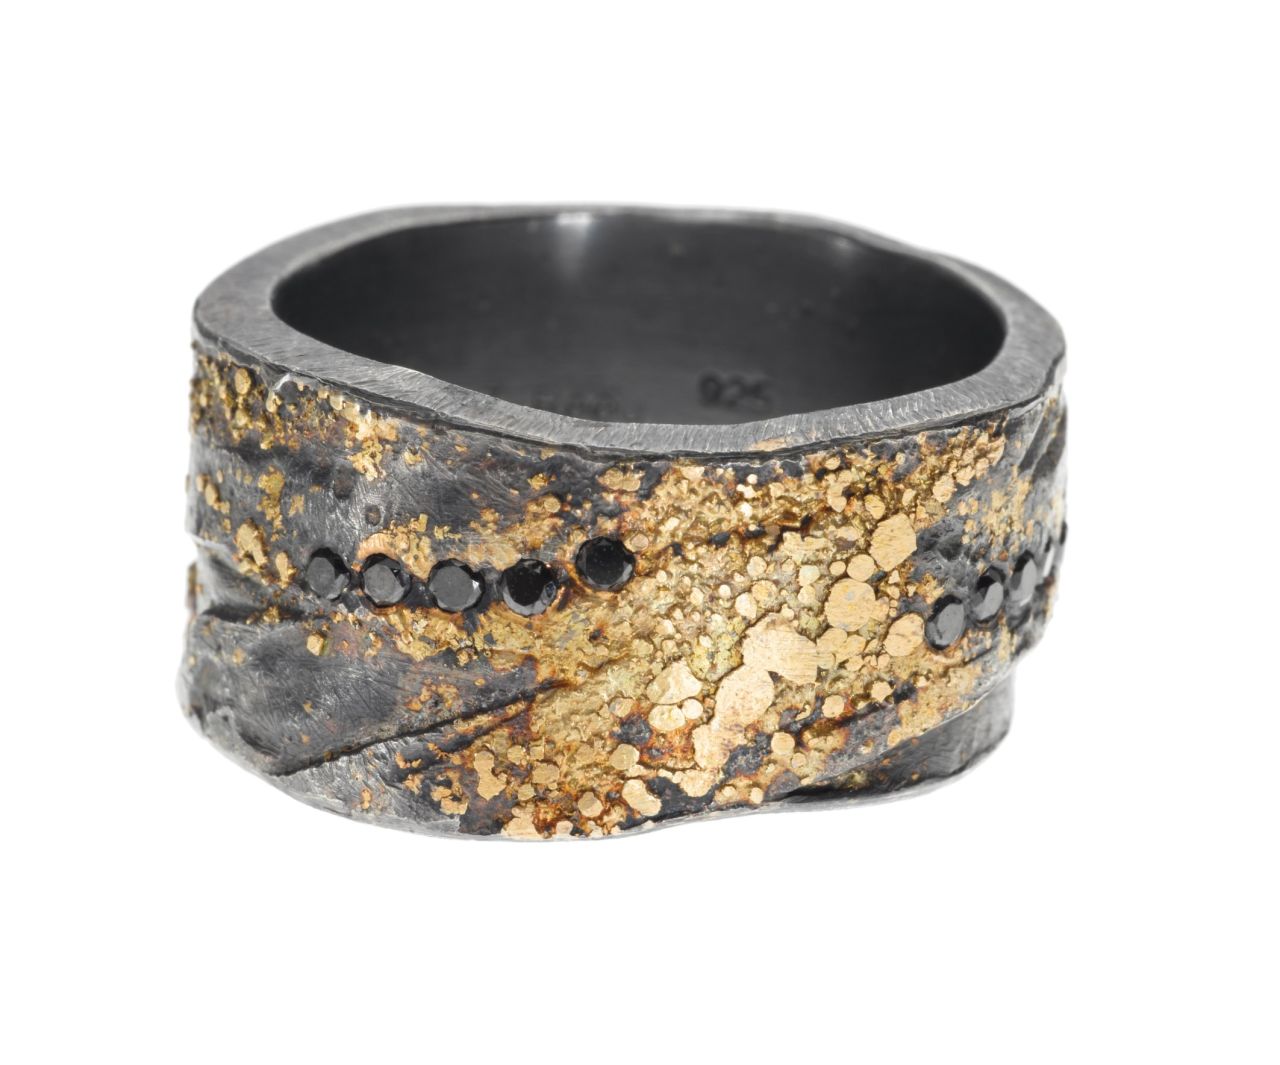 "This sterling silver and 22-karat gold band is hand fabricated by layer pieces of metal and hammering to create the texture of the band. It is a nice symbol of two people coming together to create a life together." -- Todd Reed, CEO of<a href="http://toddreed.com/" target="_blank" target="_blank"> Todd Reed </a>